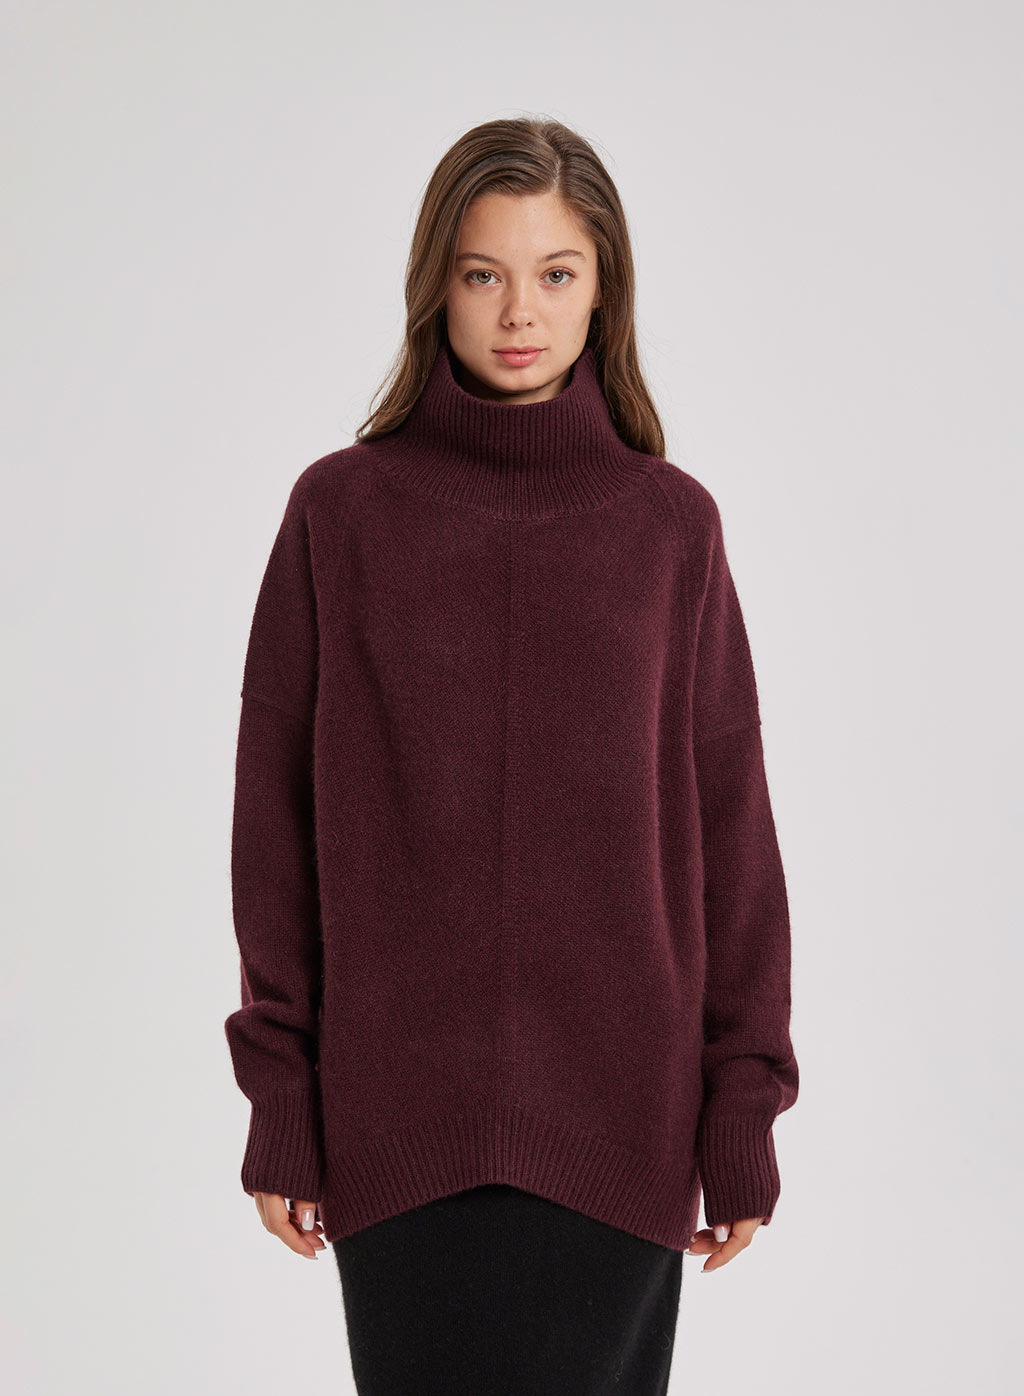 Oversized High Neck Knitted Sweater